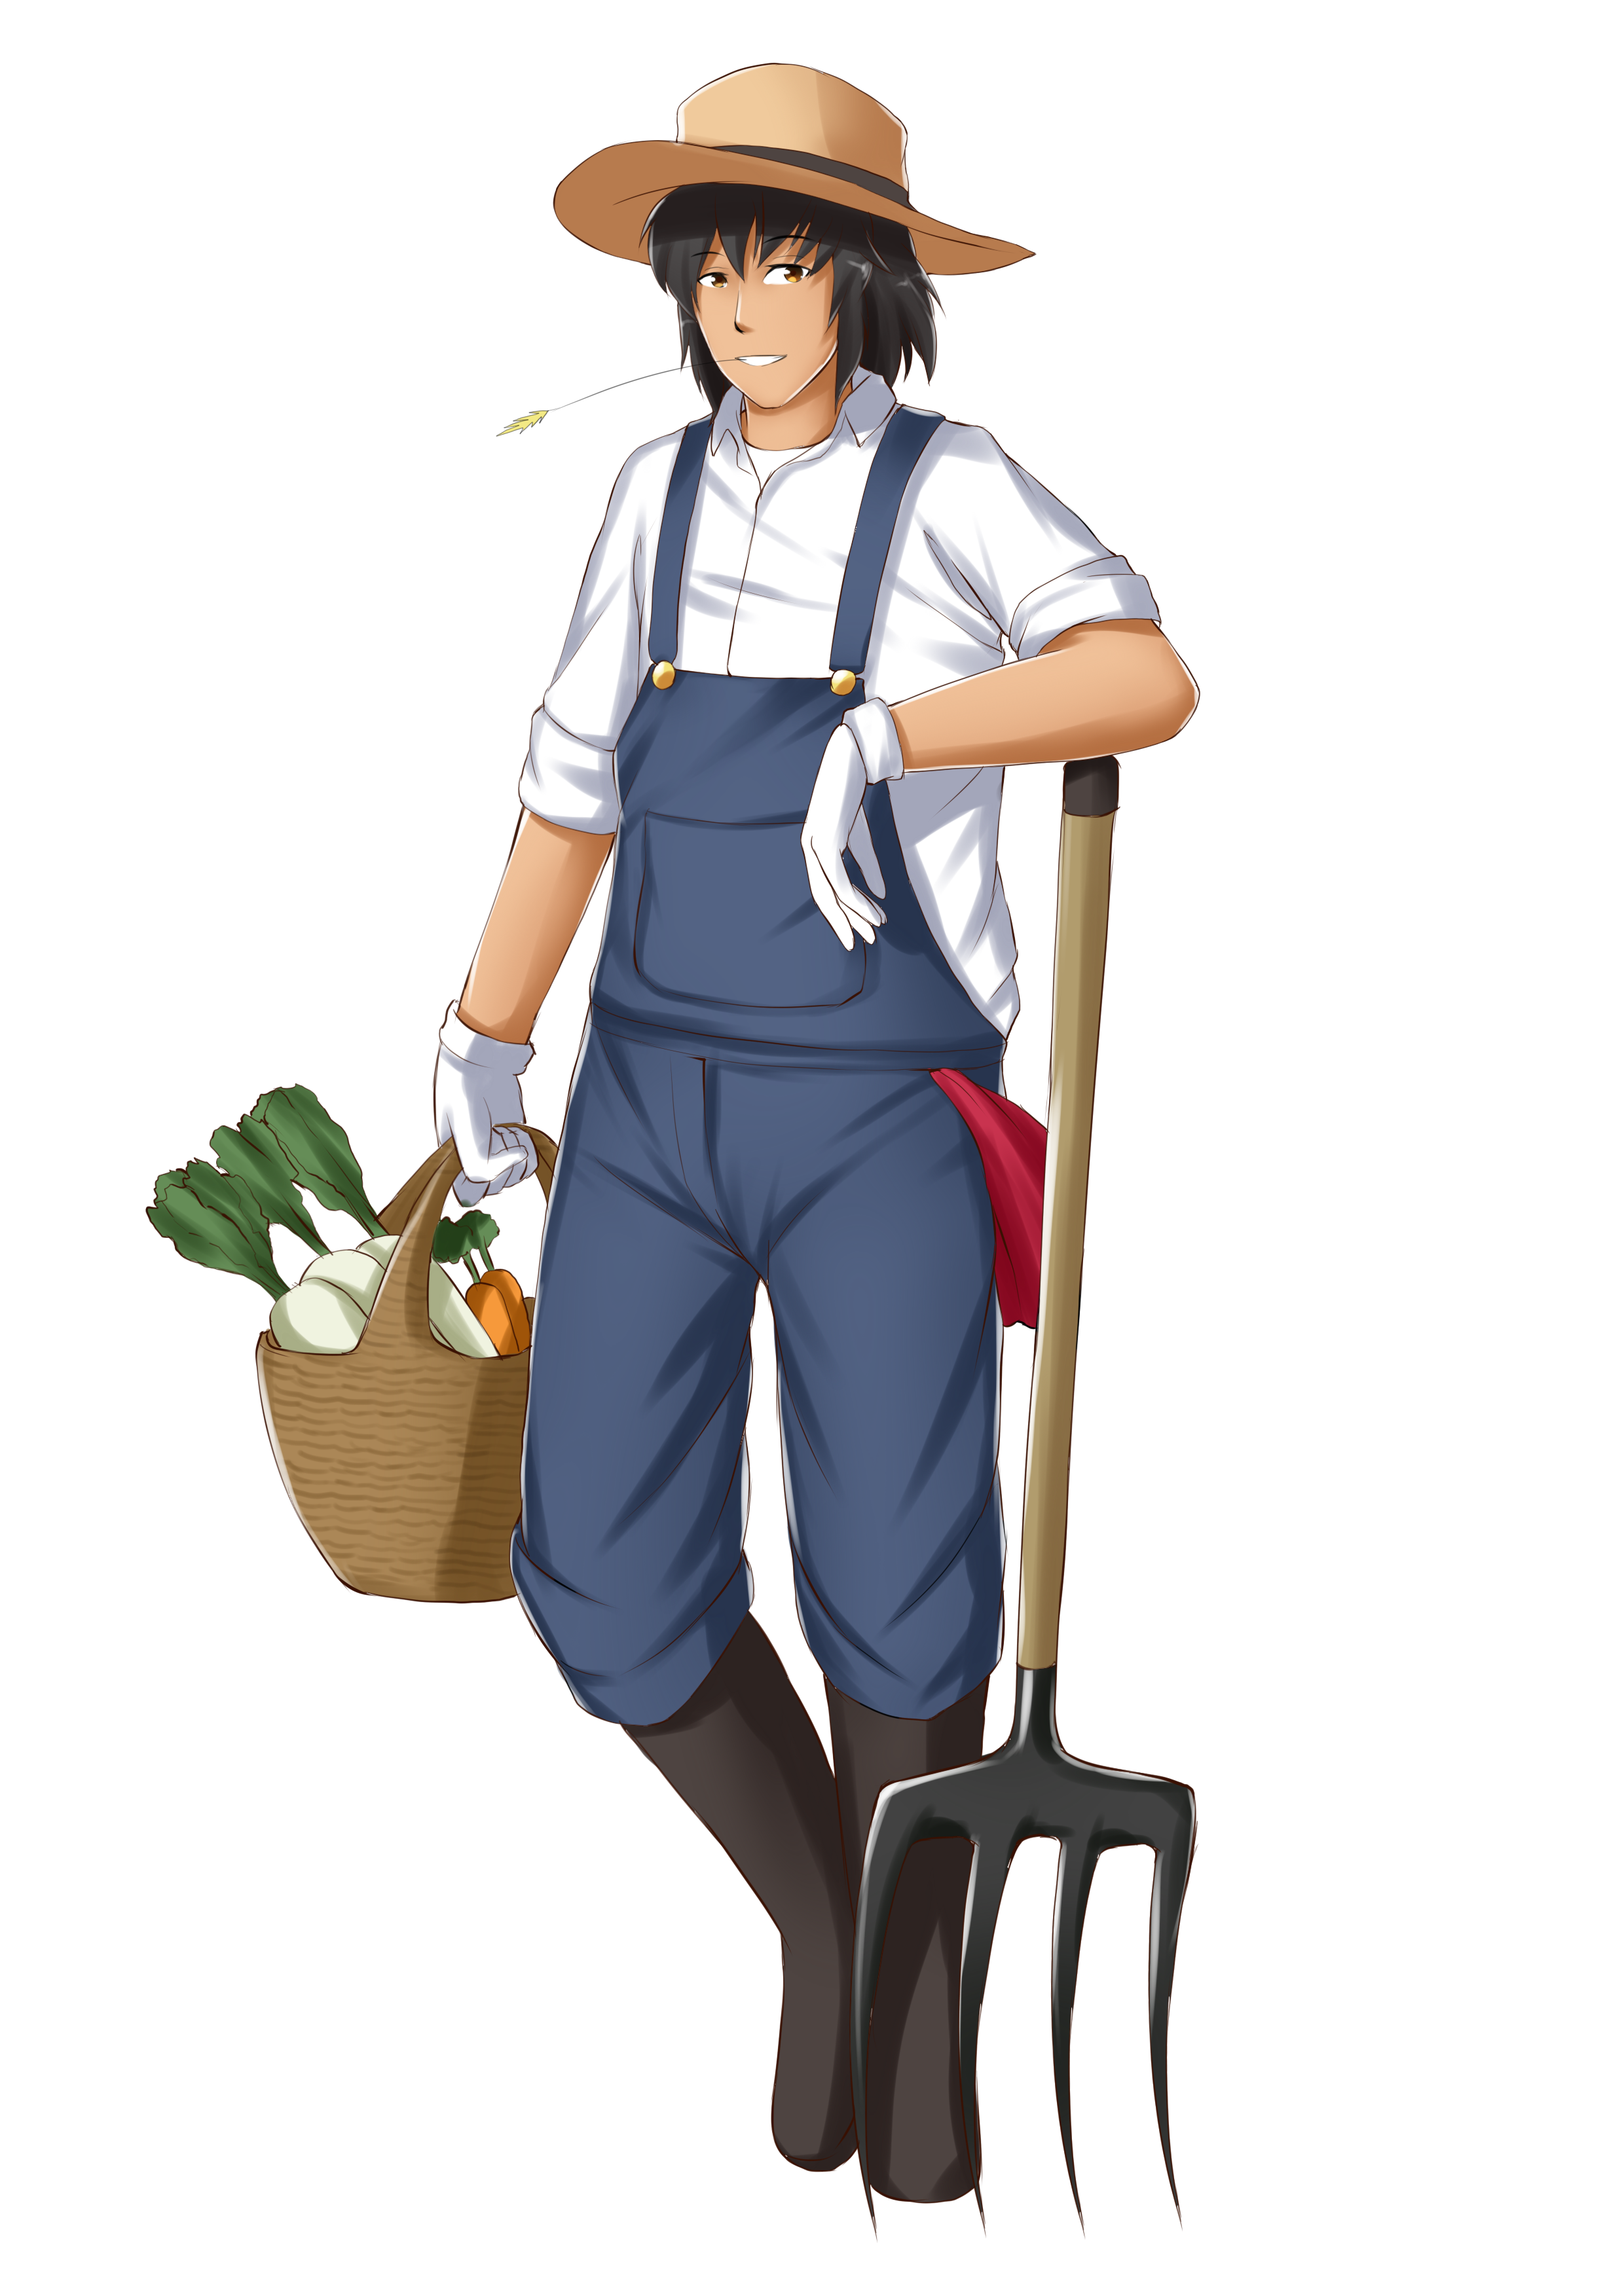 Mickey clipart farmer. Png image purepng free